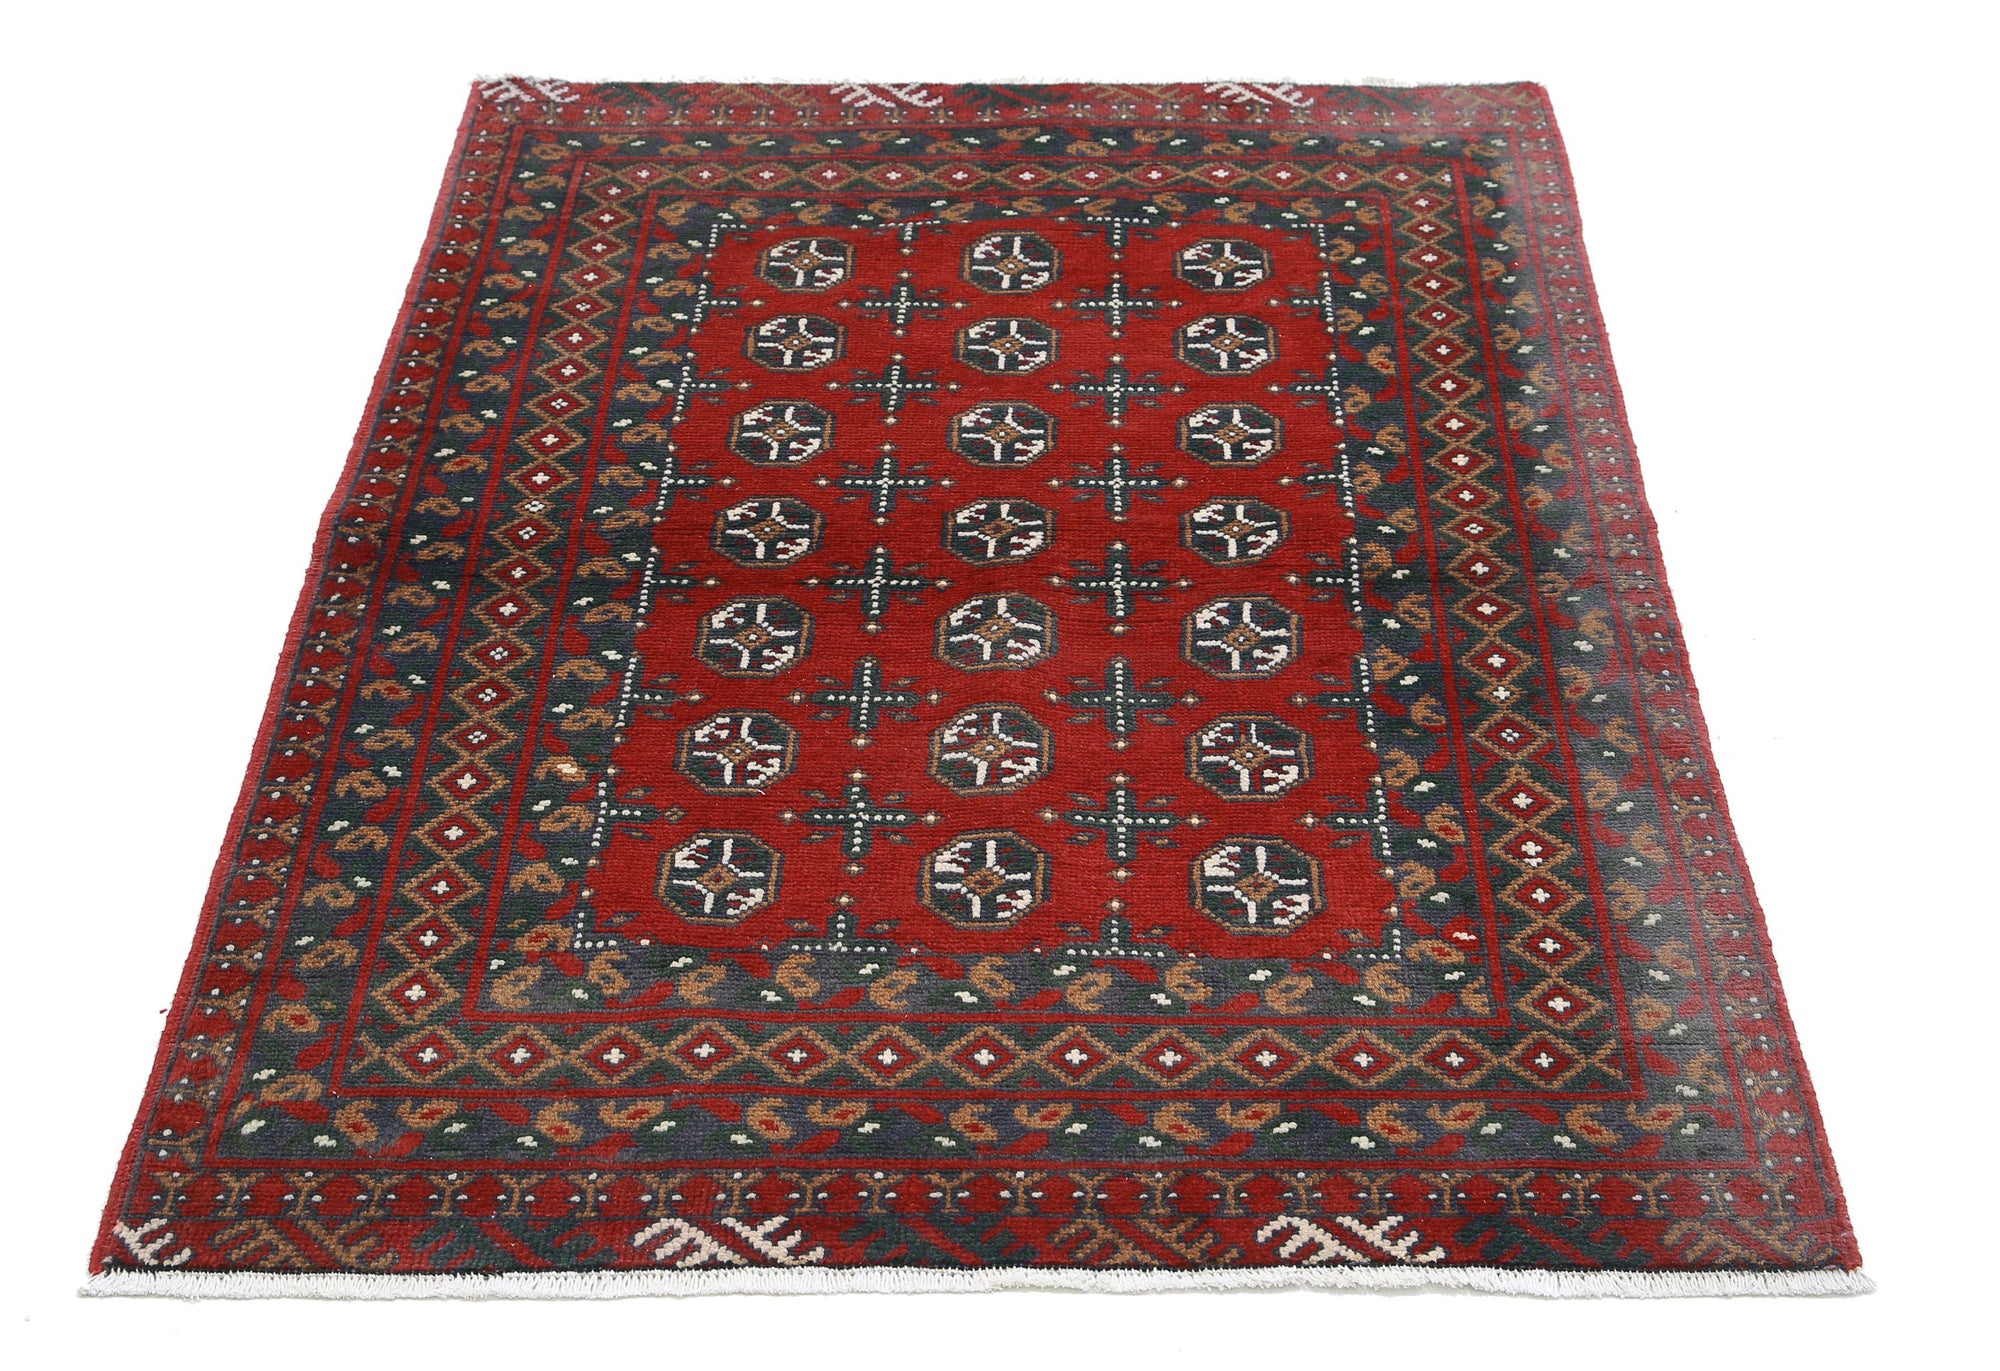 Revival-hand-knotted-gul-collection-wool-rug-5013909-3.jpg